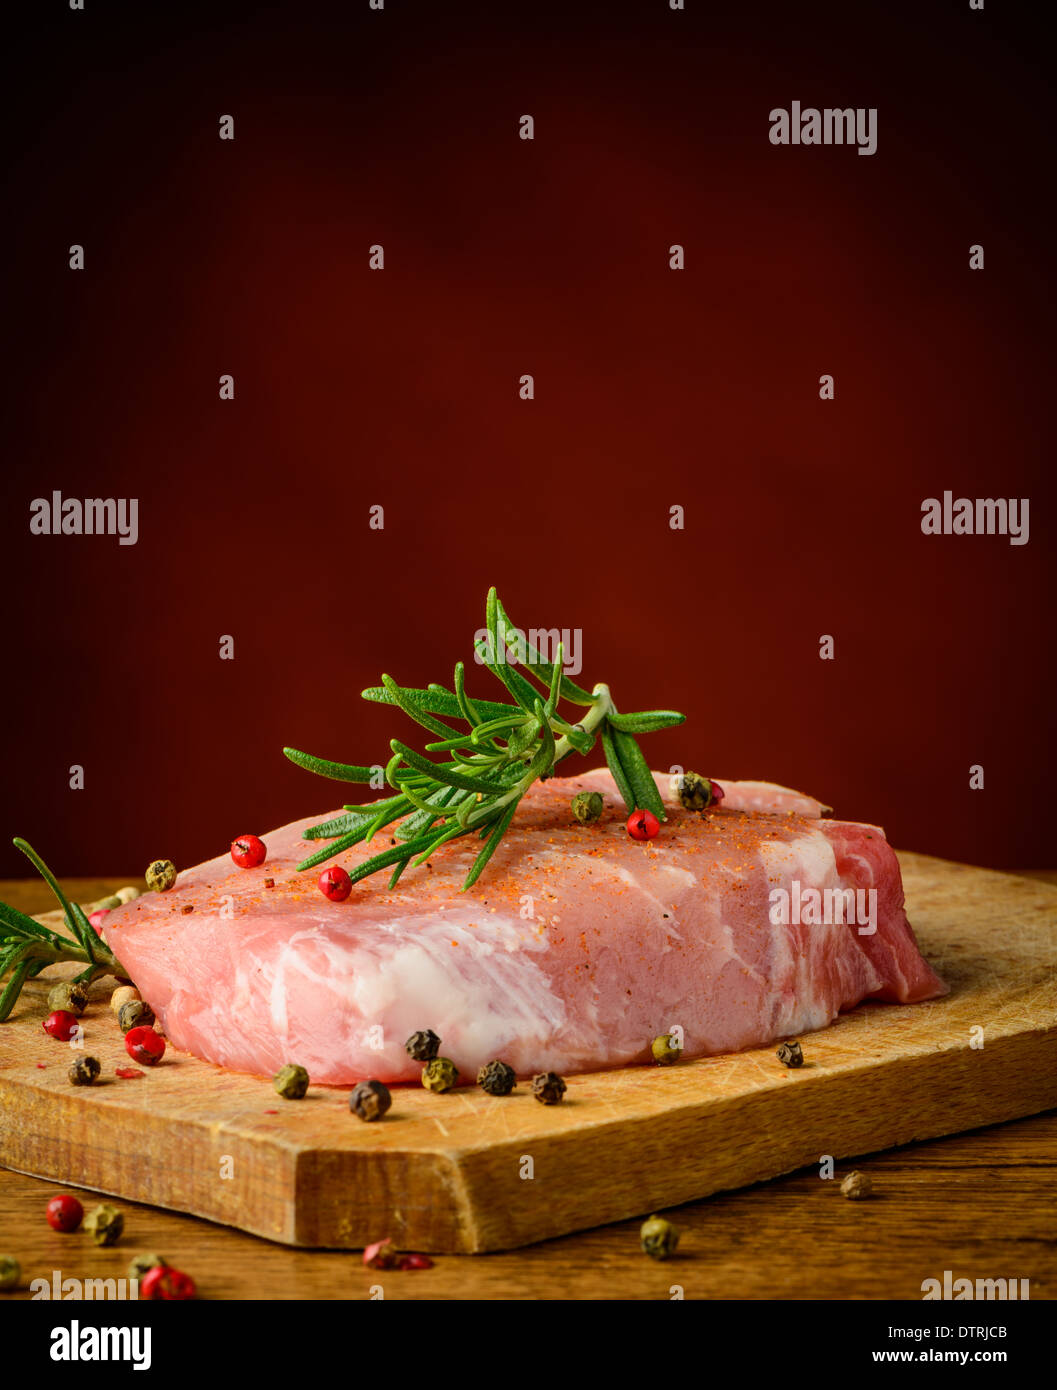 Raw pork steak, rosemary and pepper spices Stock Photo